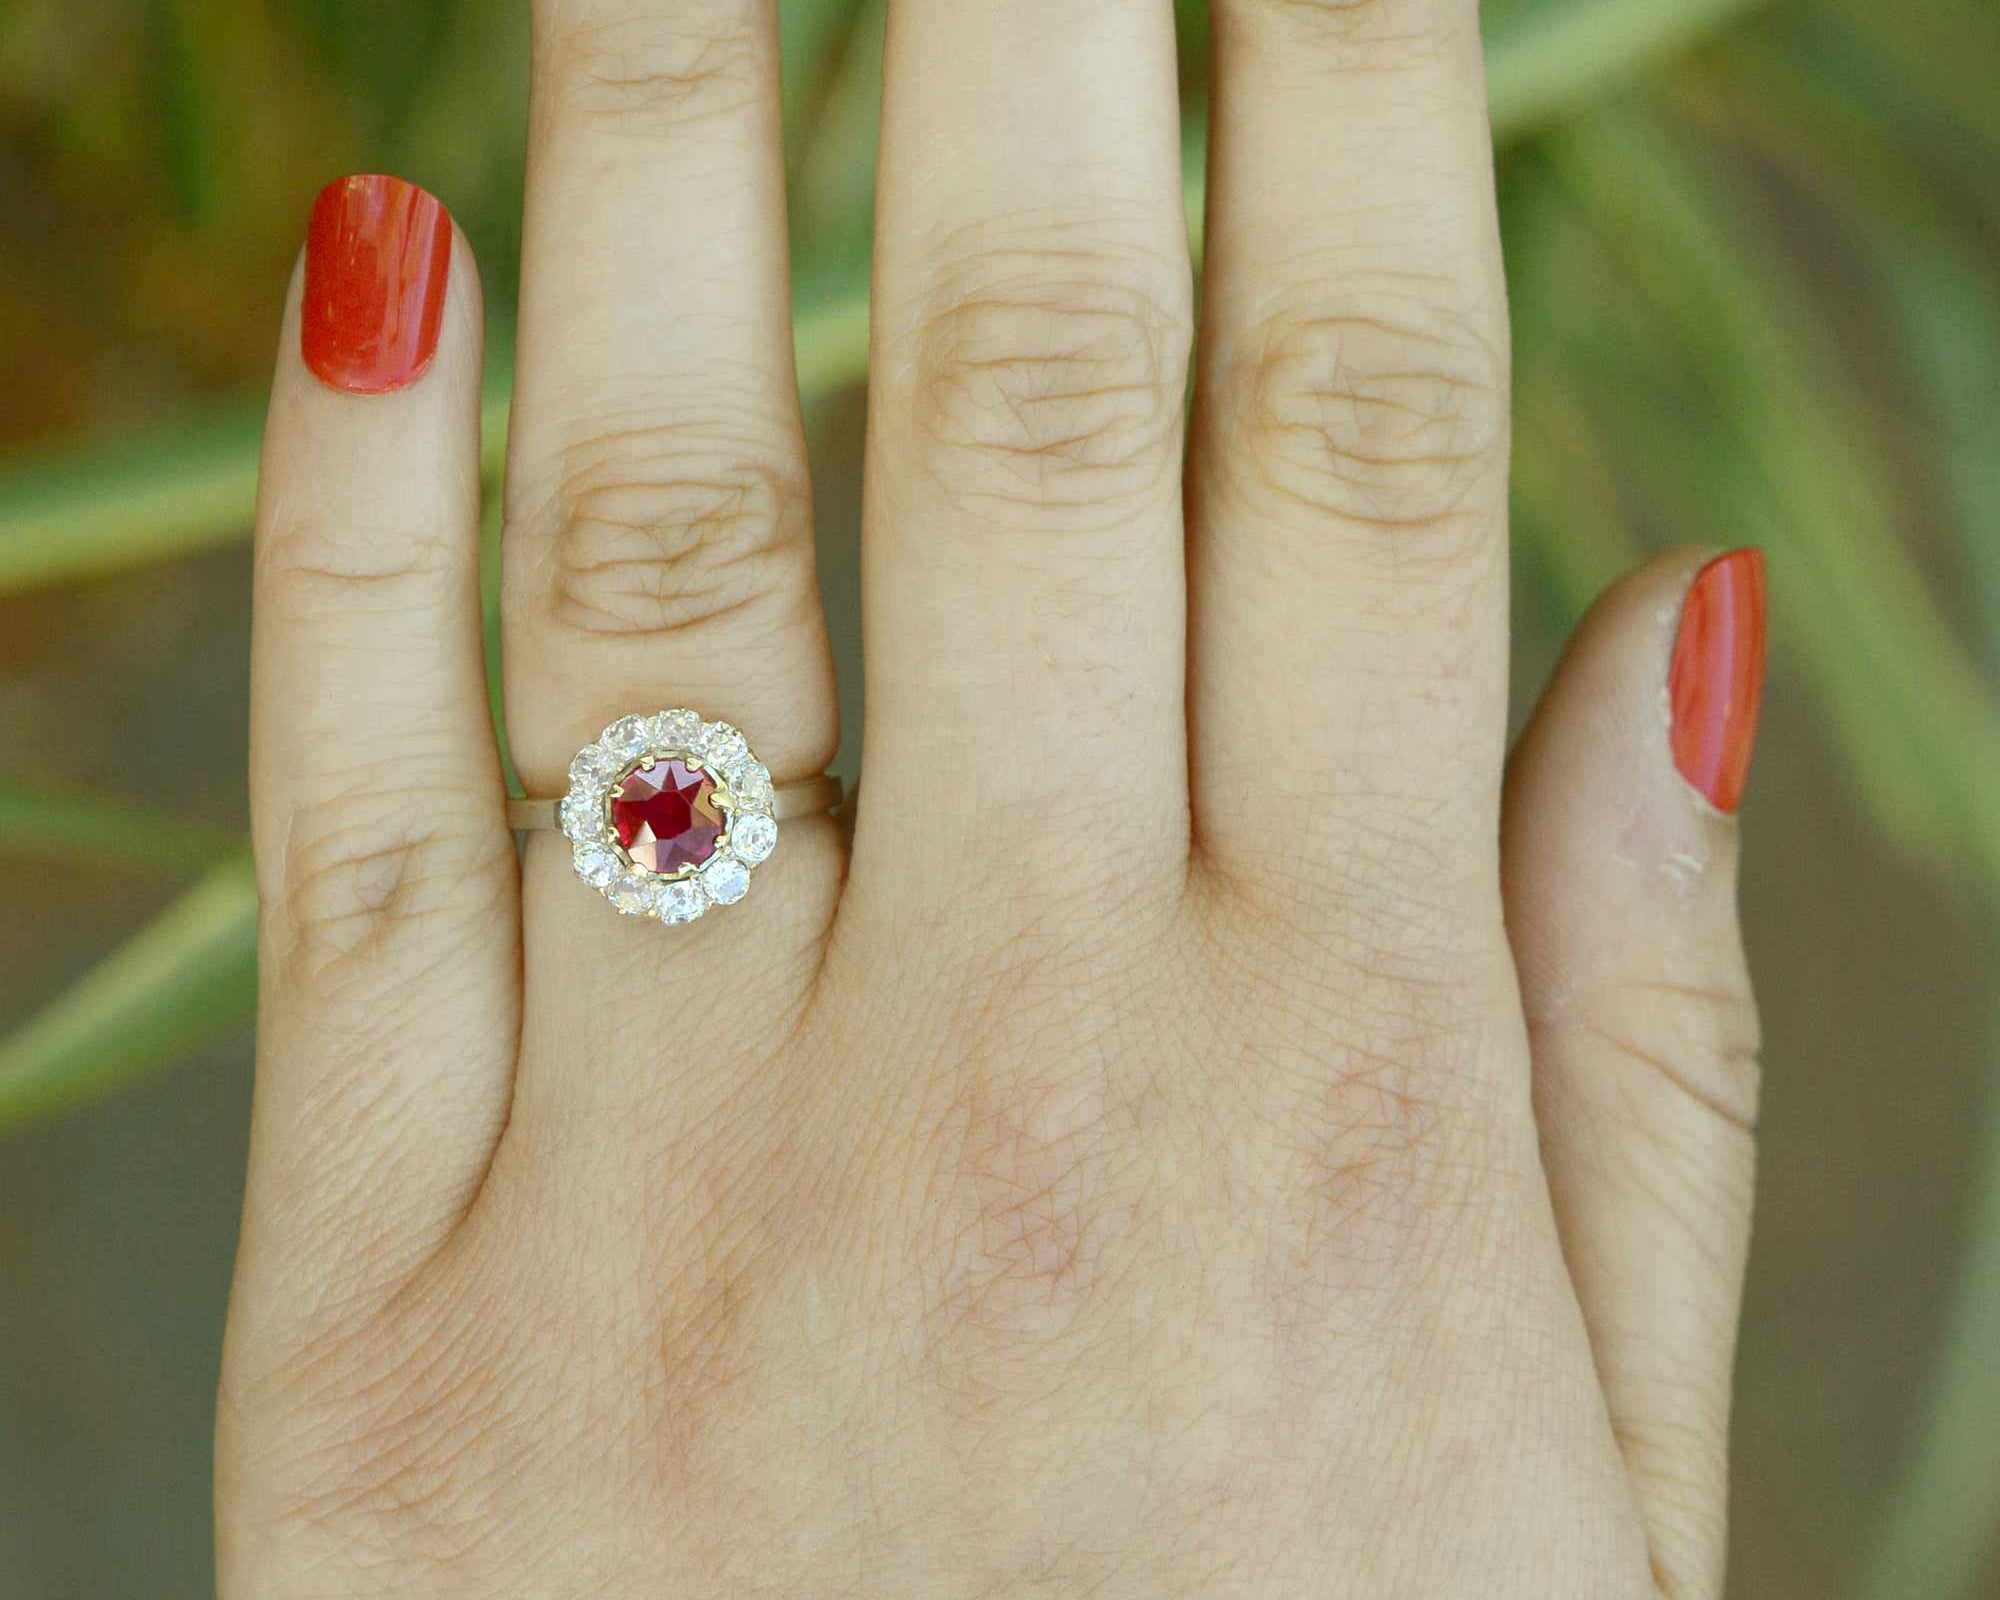 A unique size 5 platinum ruby engagement ring with an 18k gold center setting.